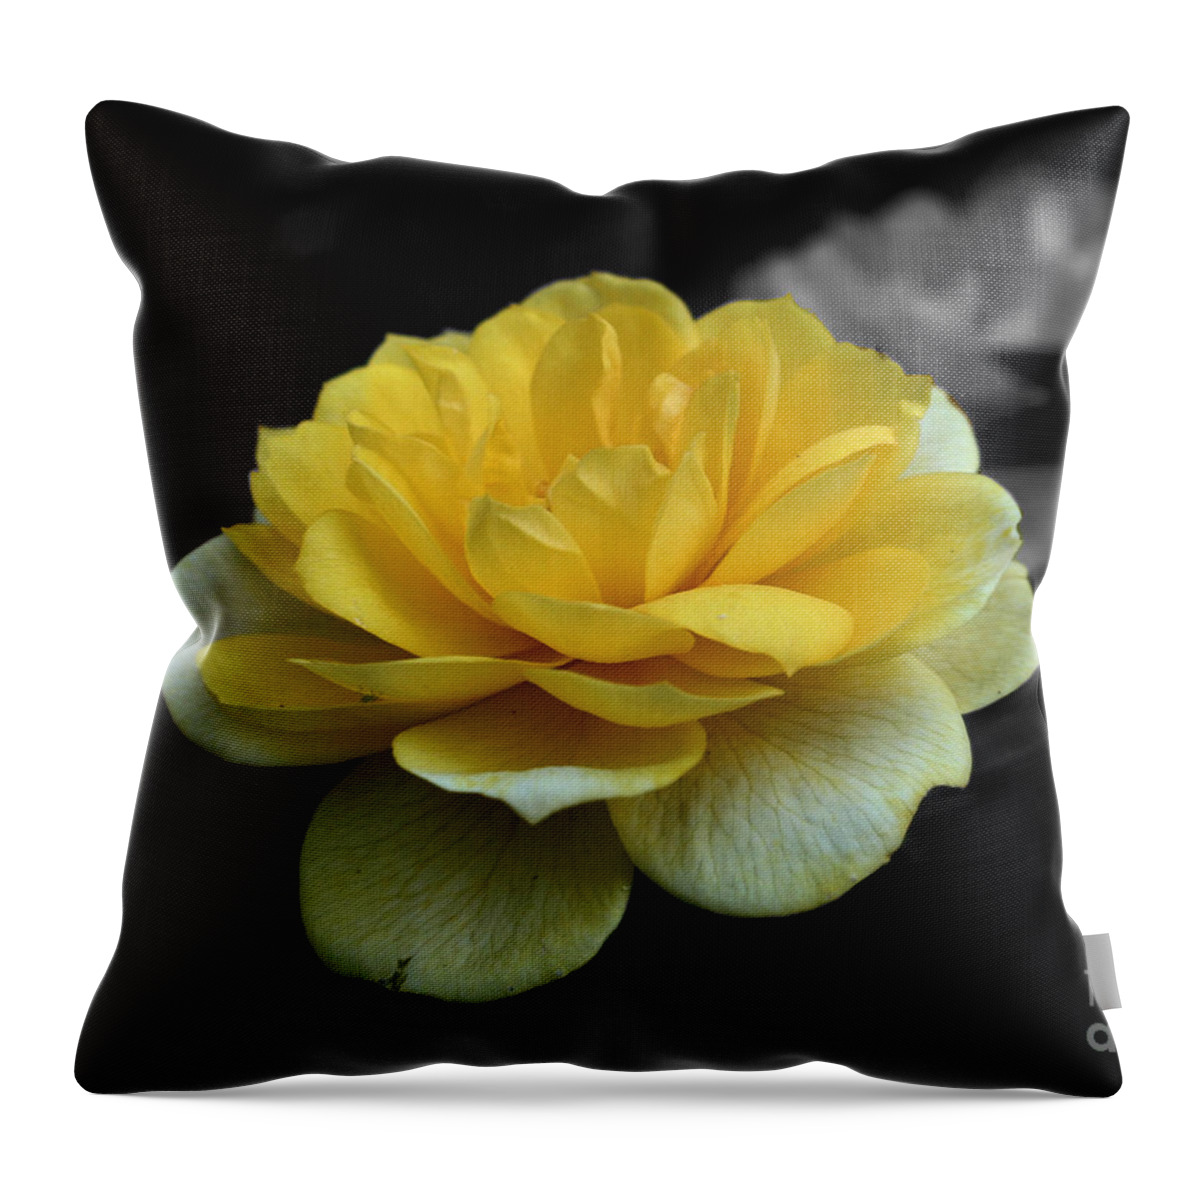 Rose Throw Pillow featuring the photograph Yellow Rose In Bloom by Smilin Eyes Treasures